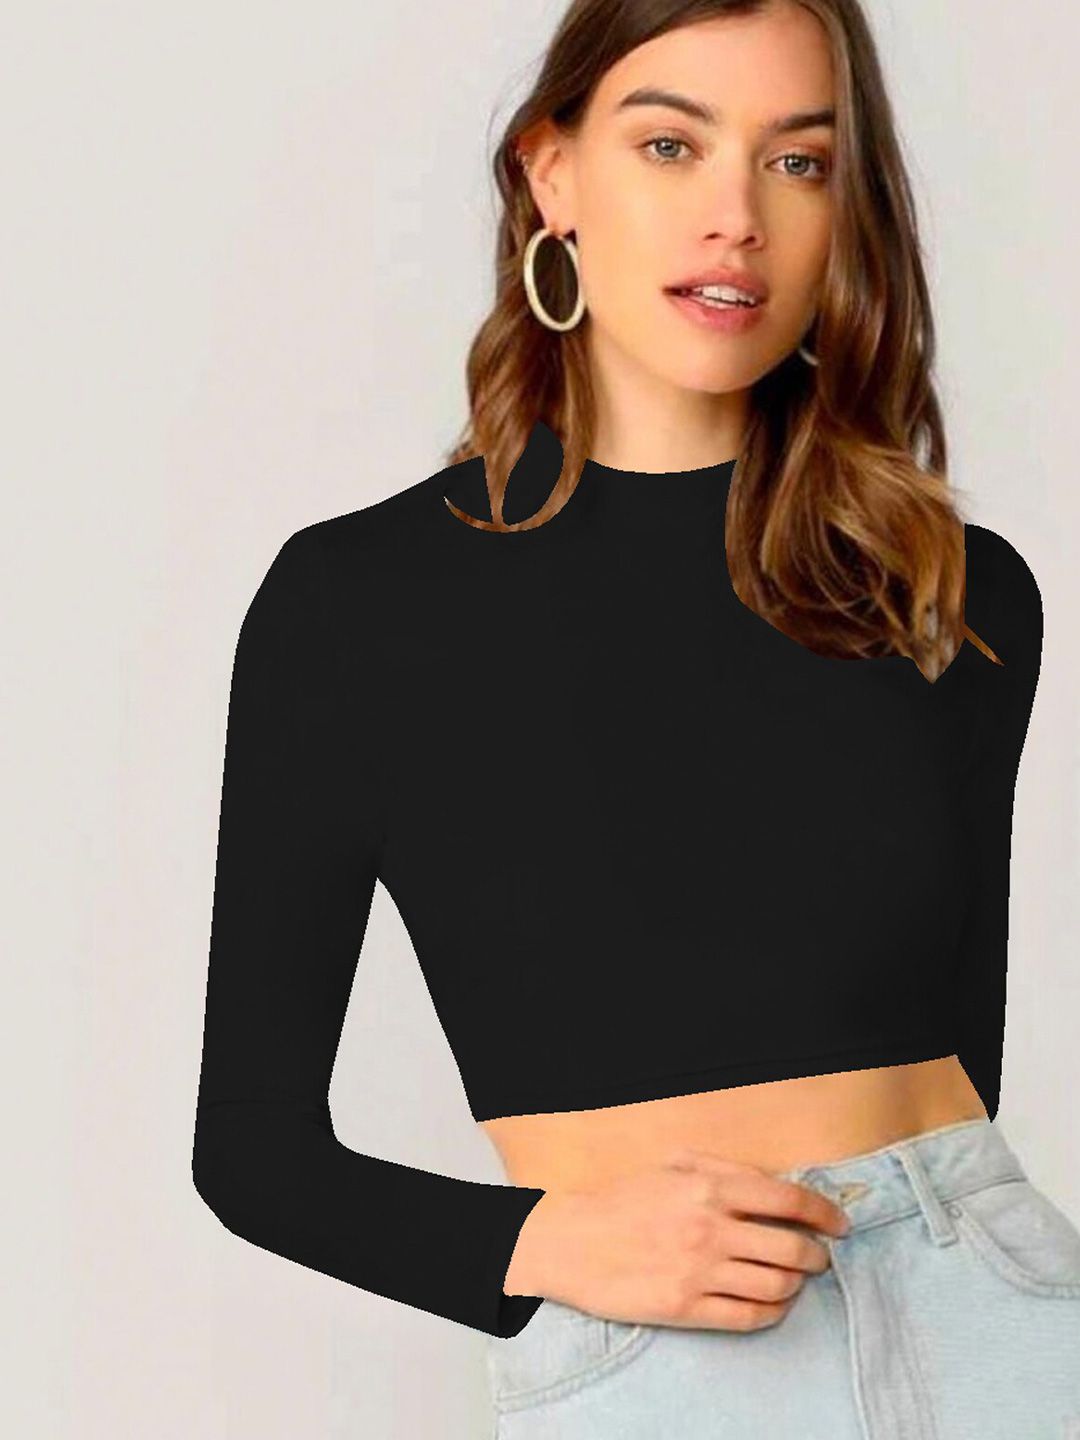 Dream Beauty Fashion Women High Neck Crop Top Price in India